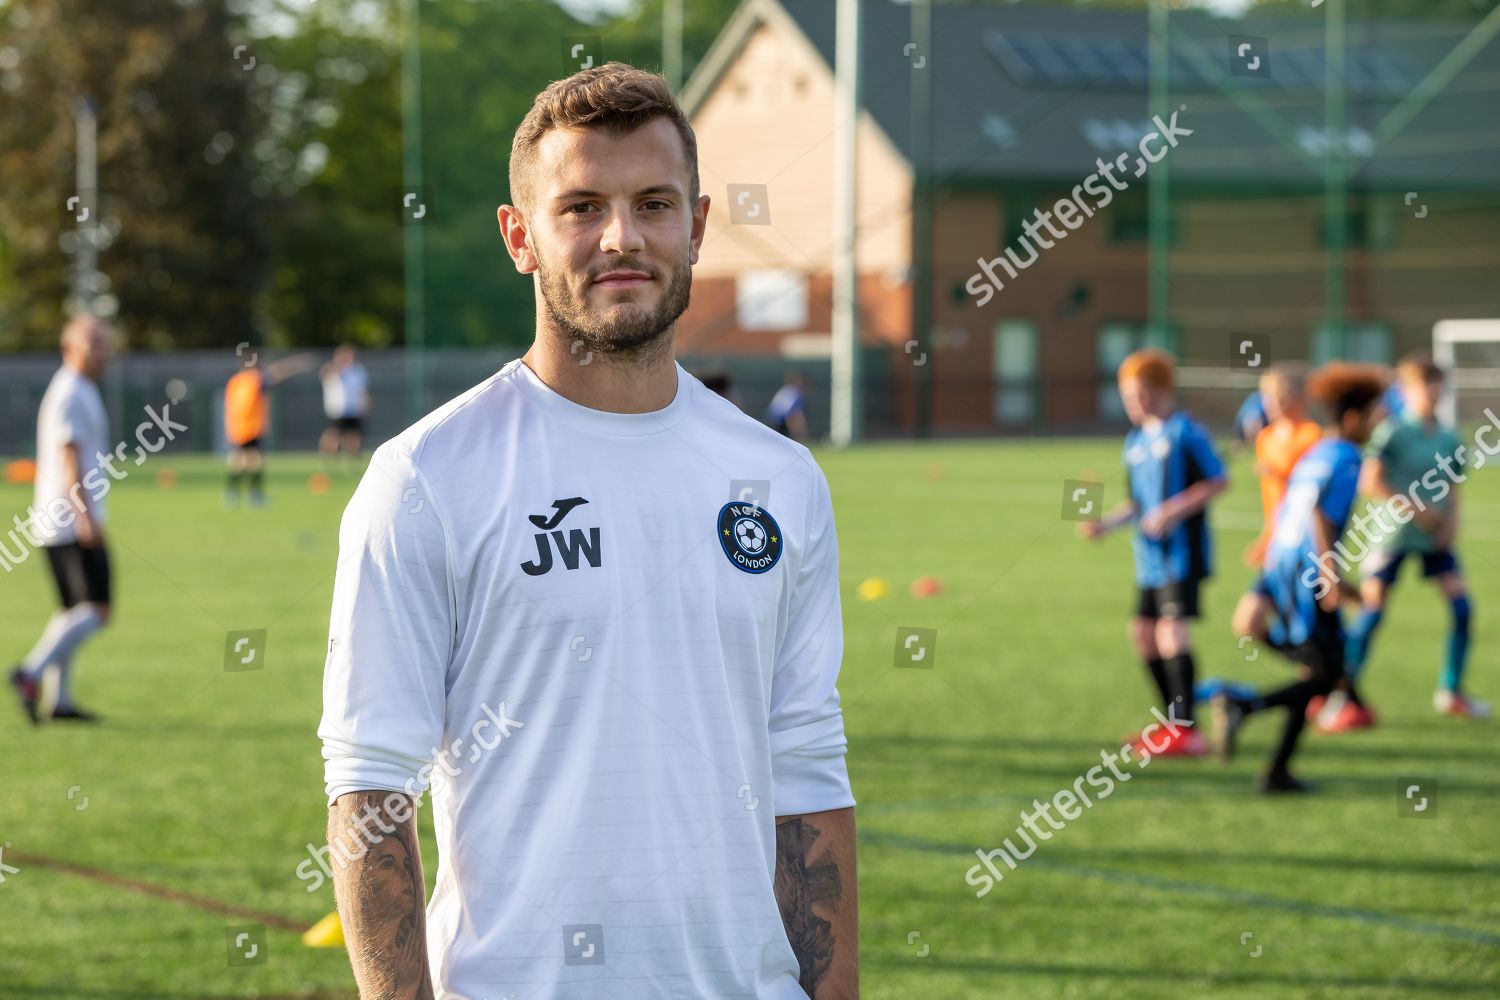 West Hams Jack Wilshere Herts Fa County Editorial Stock Photo